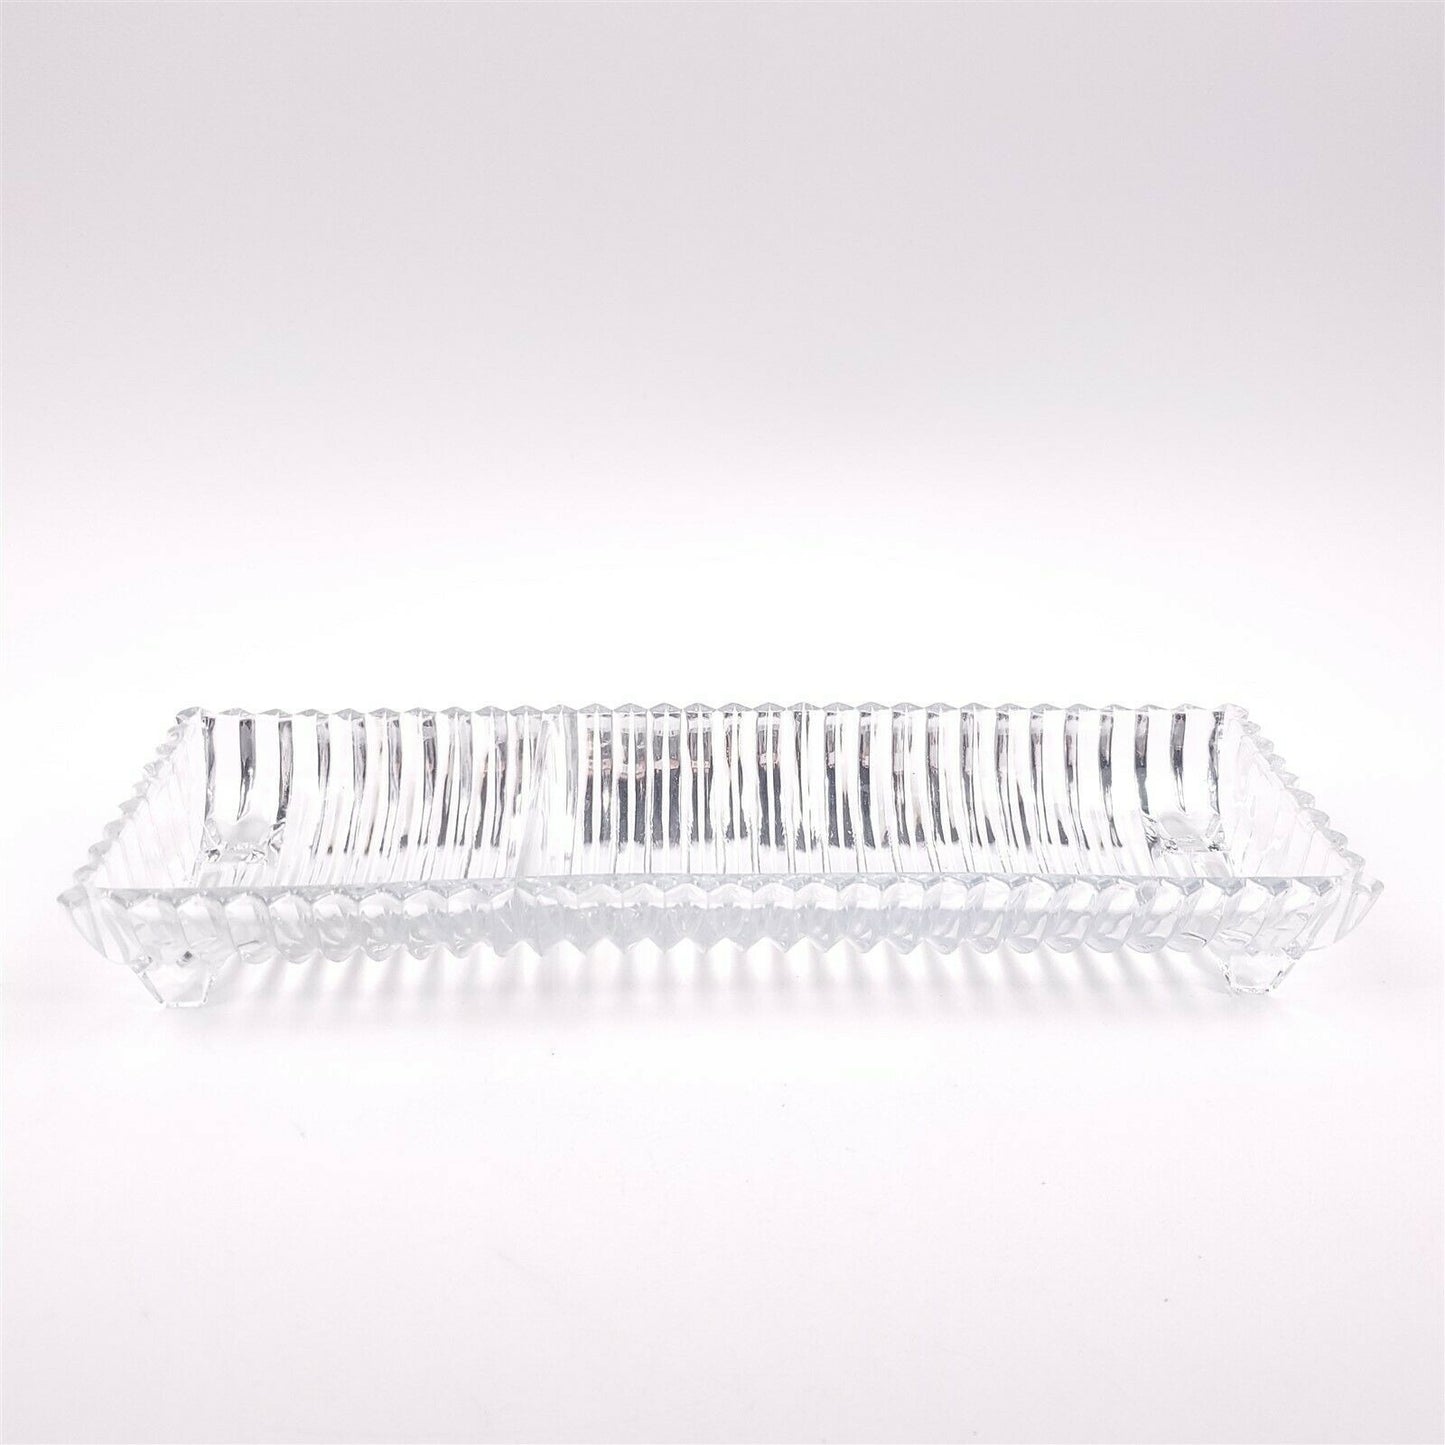 Heisey Vintage Glass Relish Celery Dish Serving Tray Rectangular Ribbed Cut